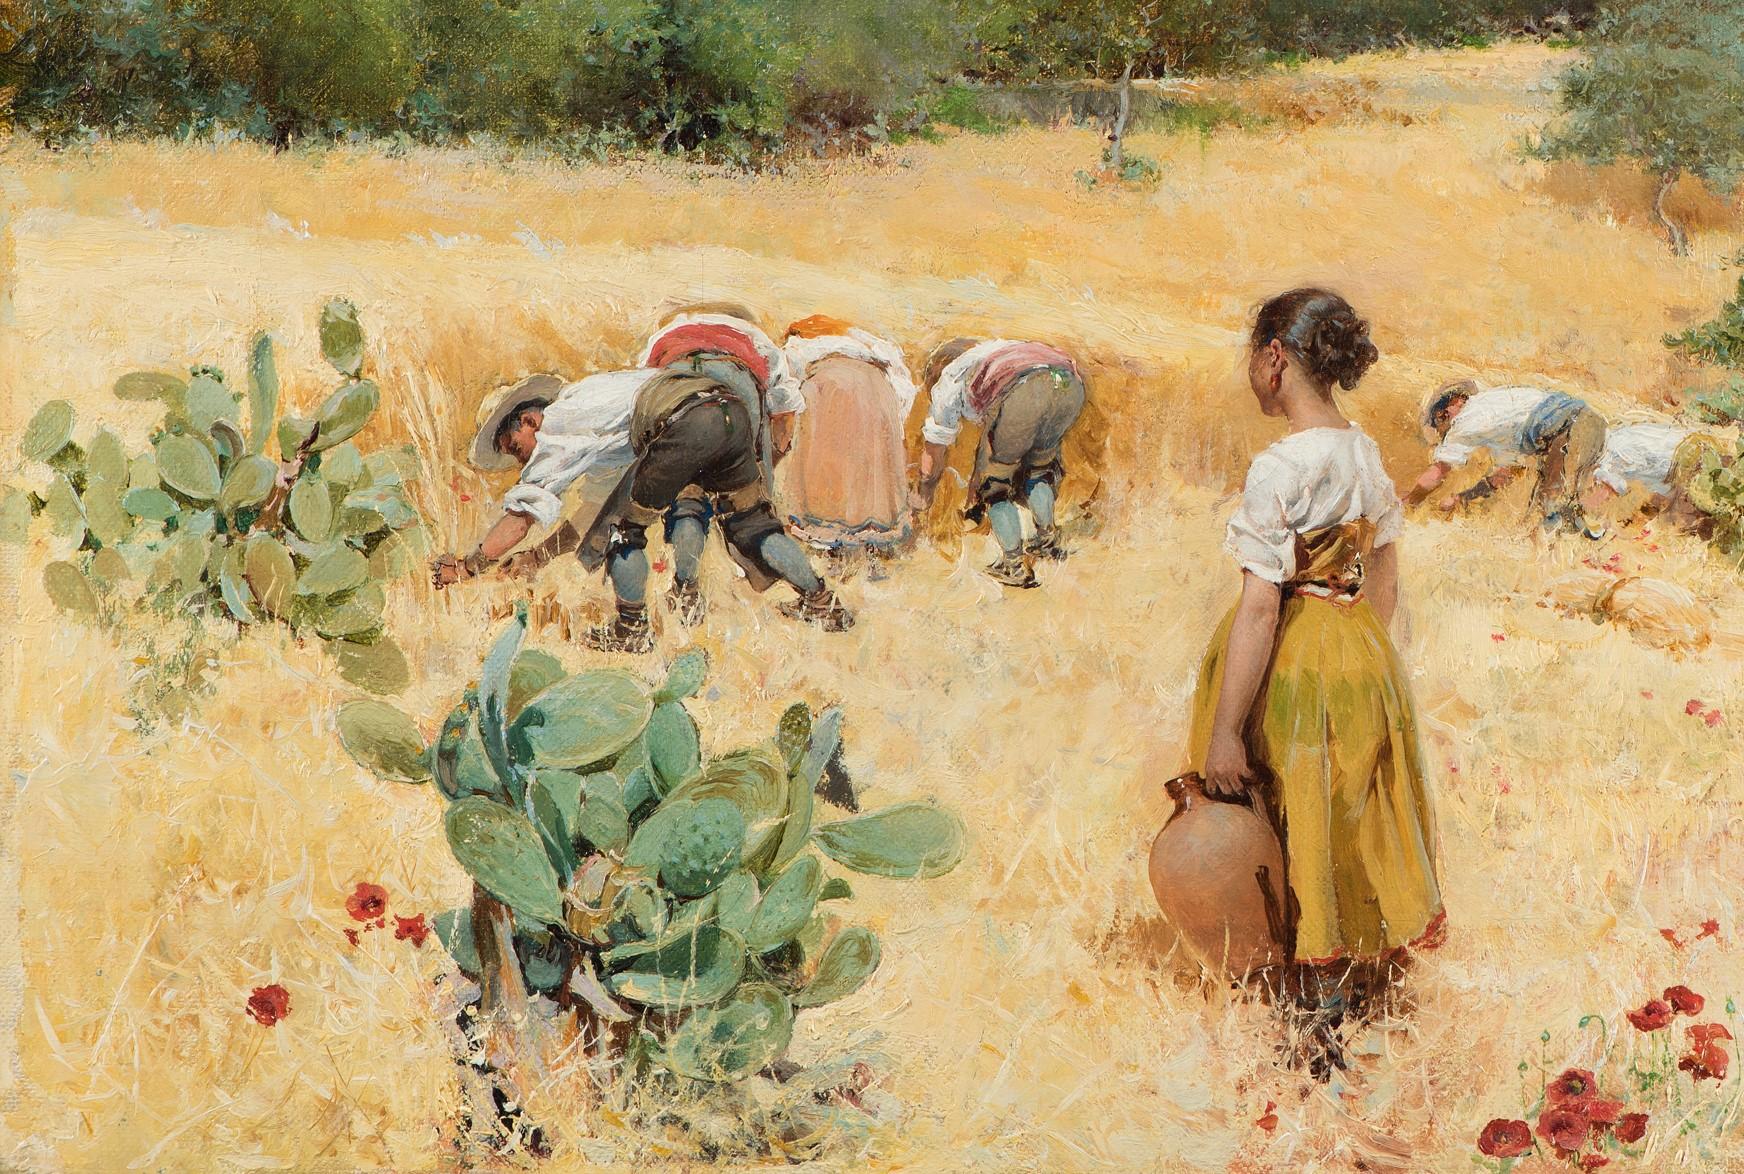 The harvest at the foot of the mountains, Framed, Oil on canvas - Painting by Angel Andrade